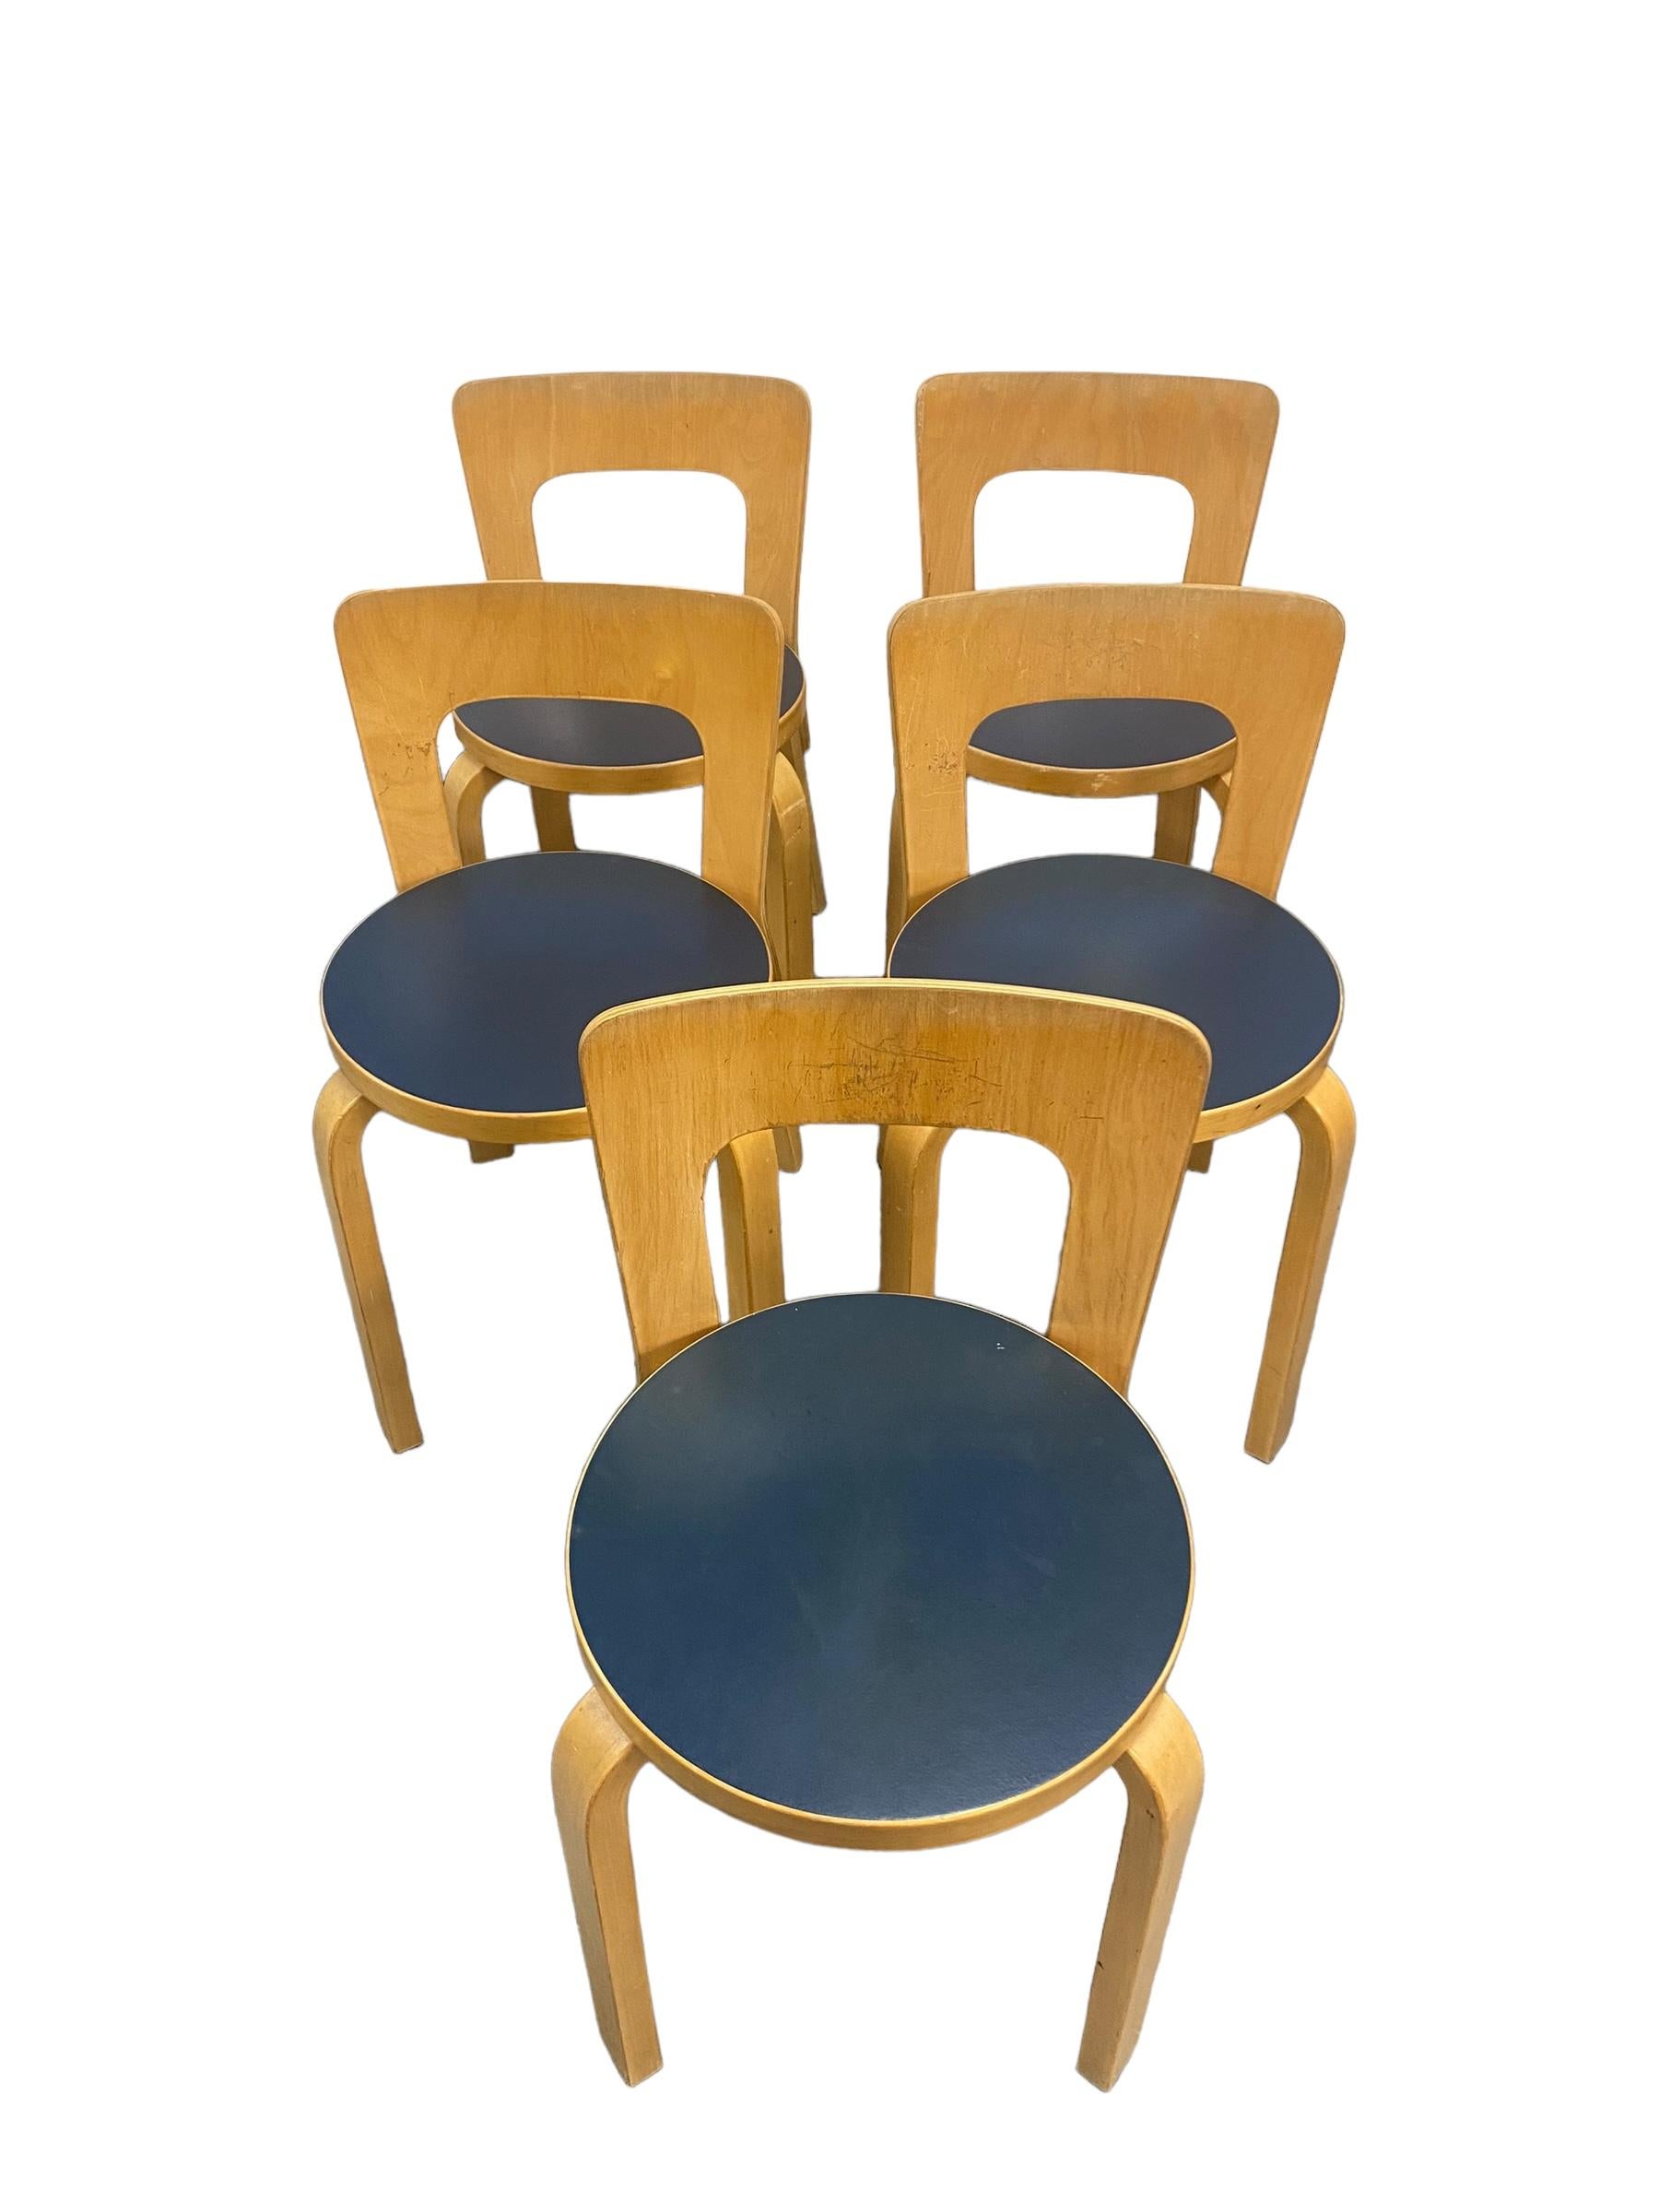 Mid-20th Century Alvar Aalto Table & 5 Model 65 Chairs In Blue Laminate, 1960s For Sale